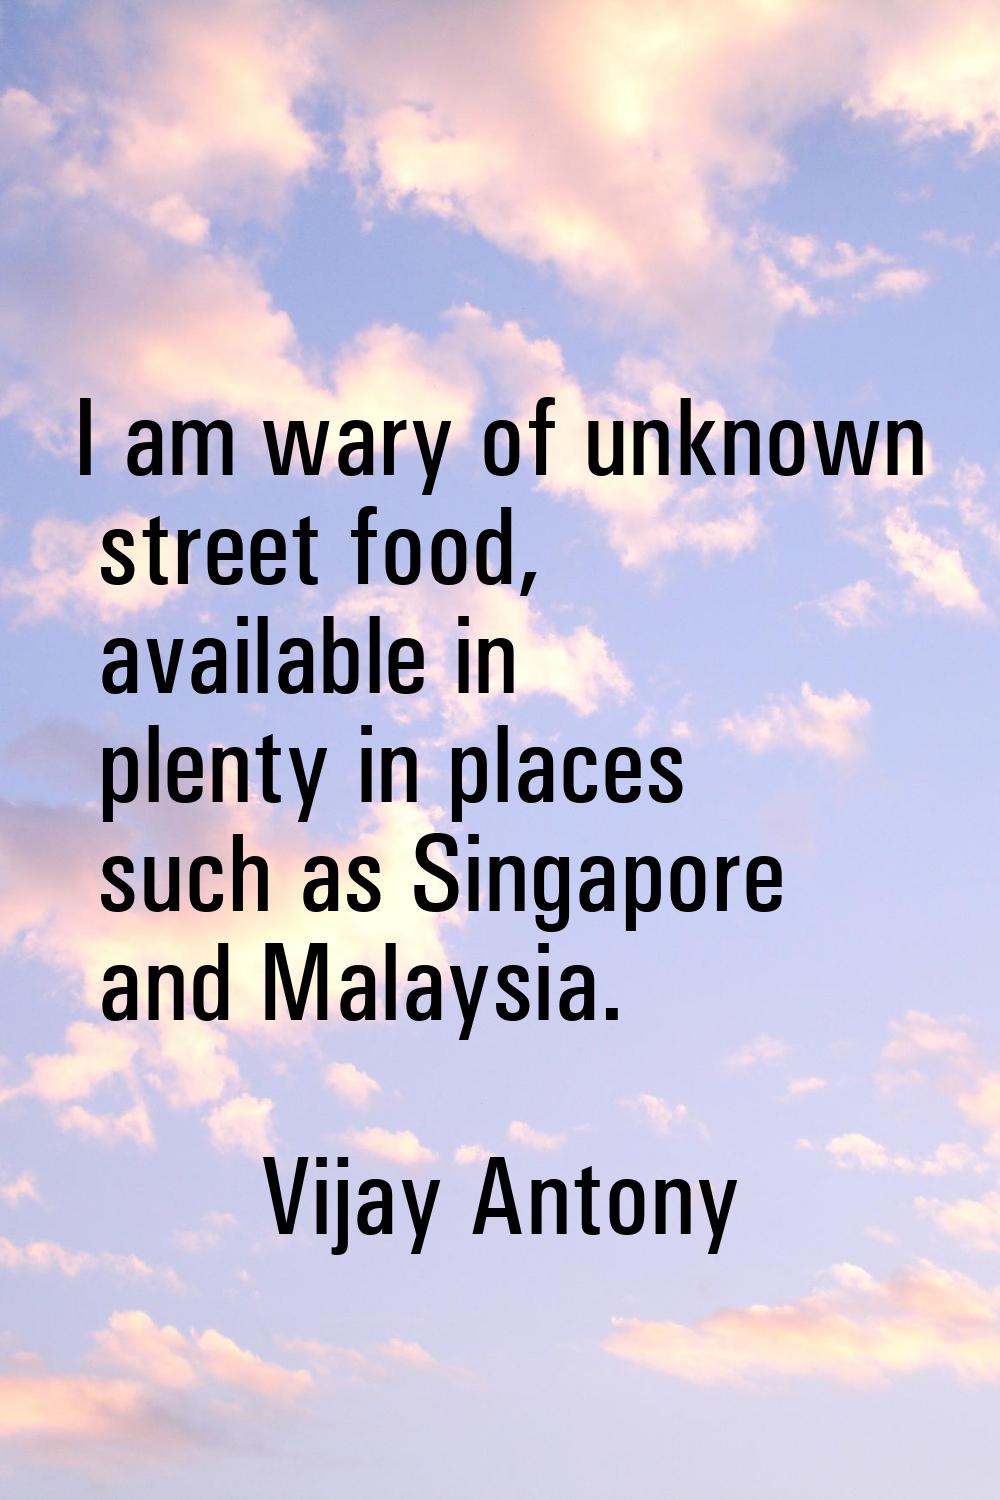 I am wary of unknown street food, available in plenty in places such as Singapore and Malaysia.